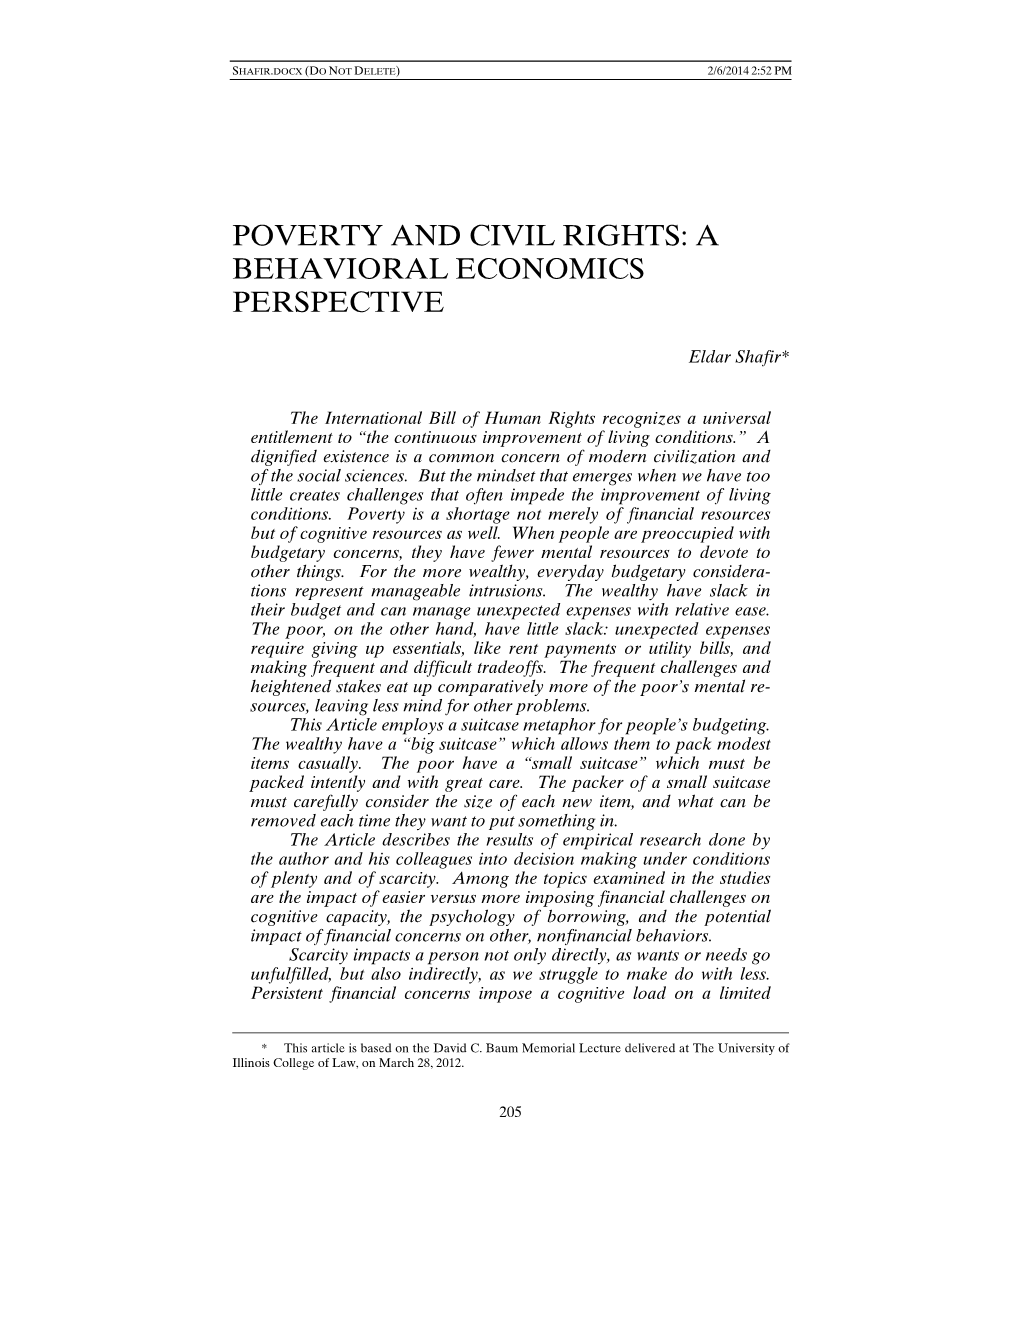 Poverty and Civil Rights: a Behavioral Economics Perspective